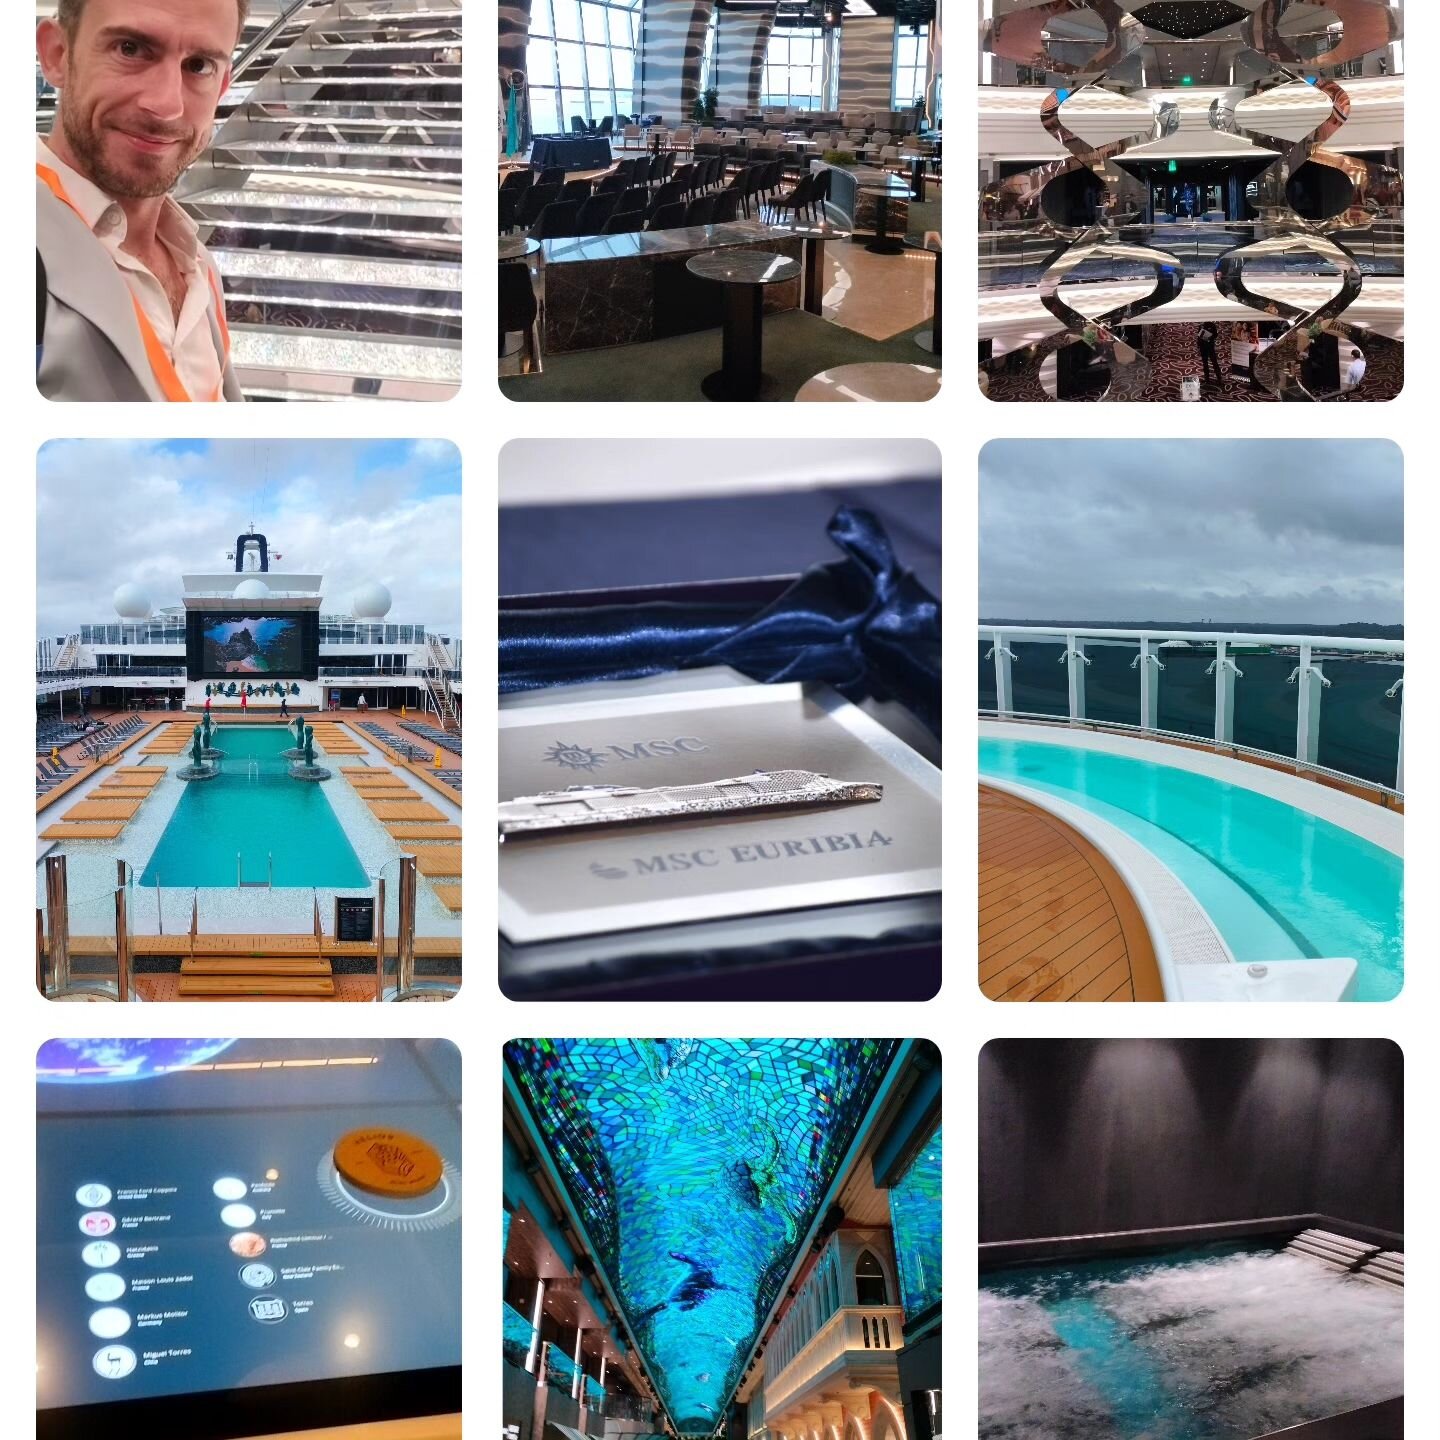 Marc ate and drank his way around @msccruisesofficial new Euribia ship on a press tour as it makes Southampton its home for winter sailings. It is a lovely ship despite the grey skies! #cruise #cruiseship #ship #holiday #lifeatsea #sea #holiday #sun 